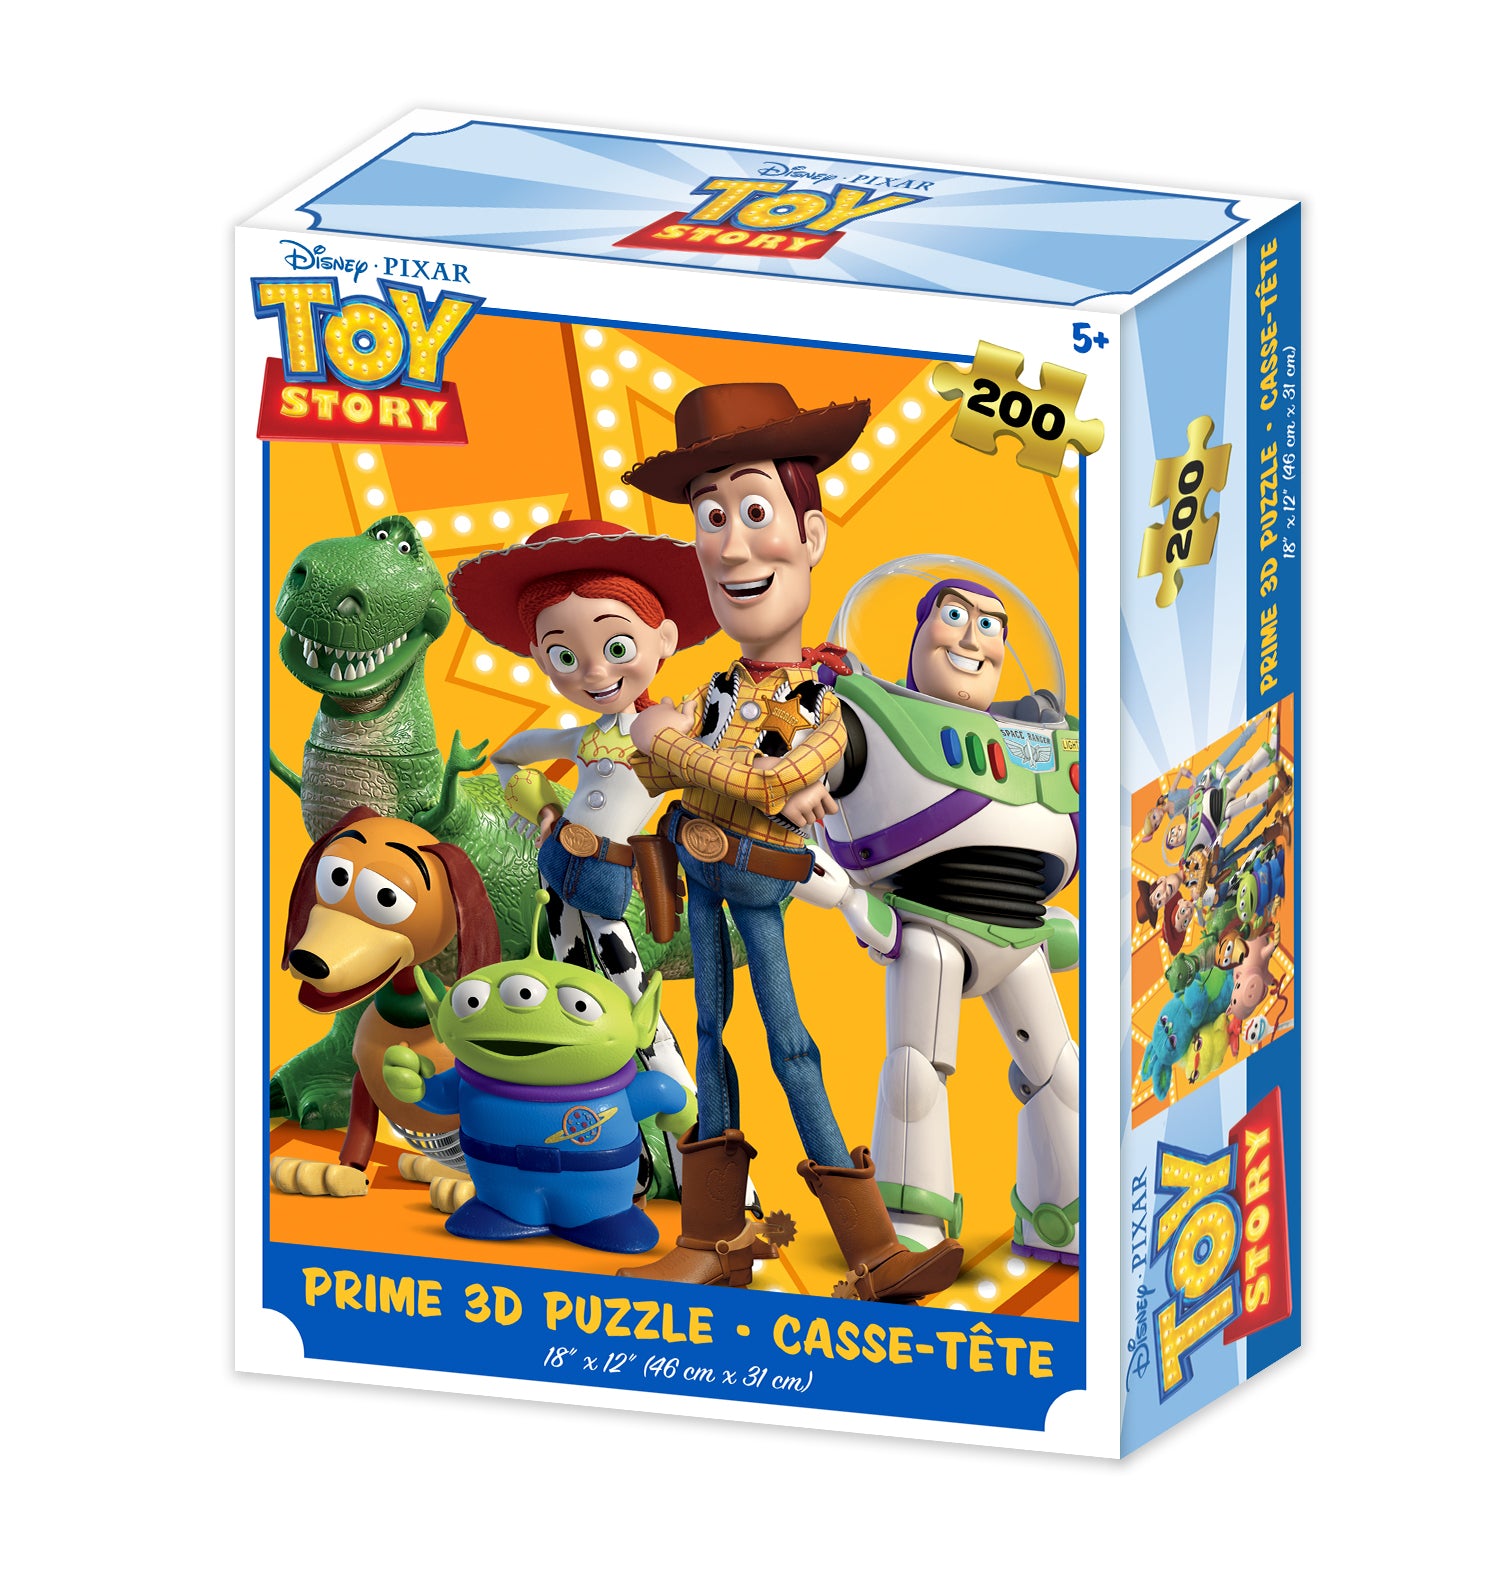 Disney Toy Story 4 12-Pack of Puzzles 